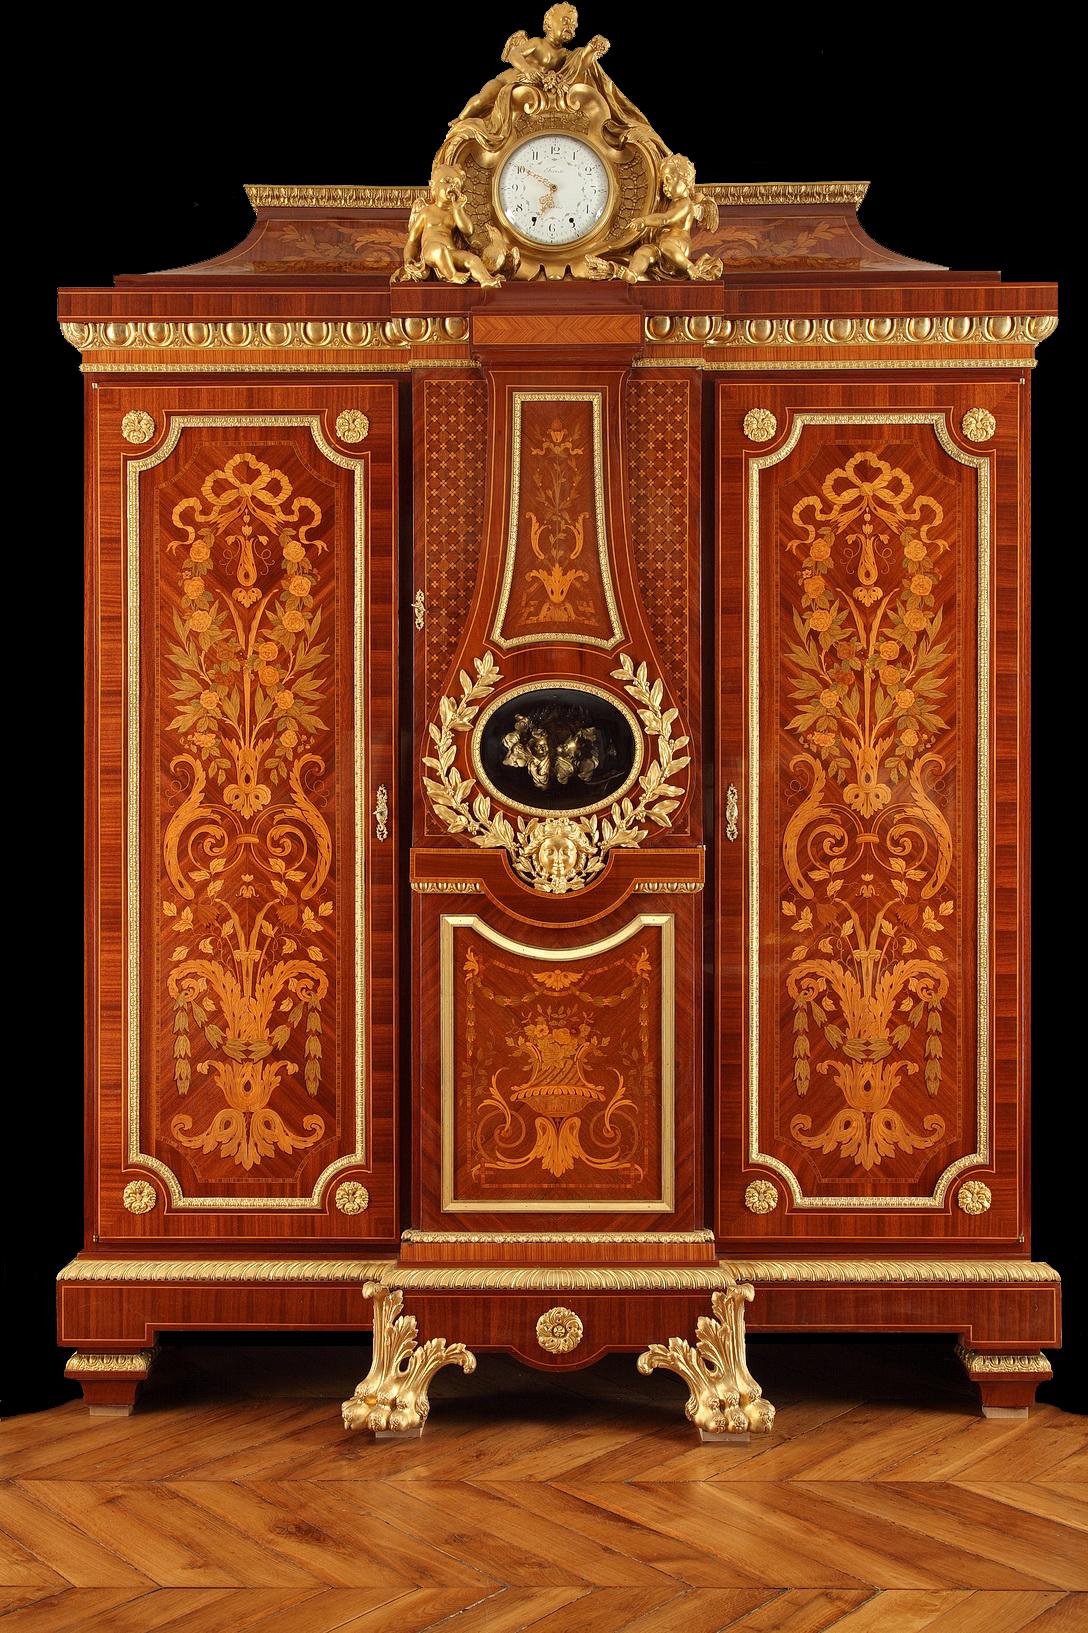 Signed Forest à Paris

A rare Louis XIV style wardrobe with a break-fronted ogee pediment. Opening with two side cupboards flanking a regulator clock, richly decorated with marquetry ornated with roses, laurel wreaths, acanthuses and ribbons.